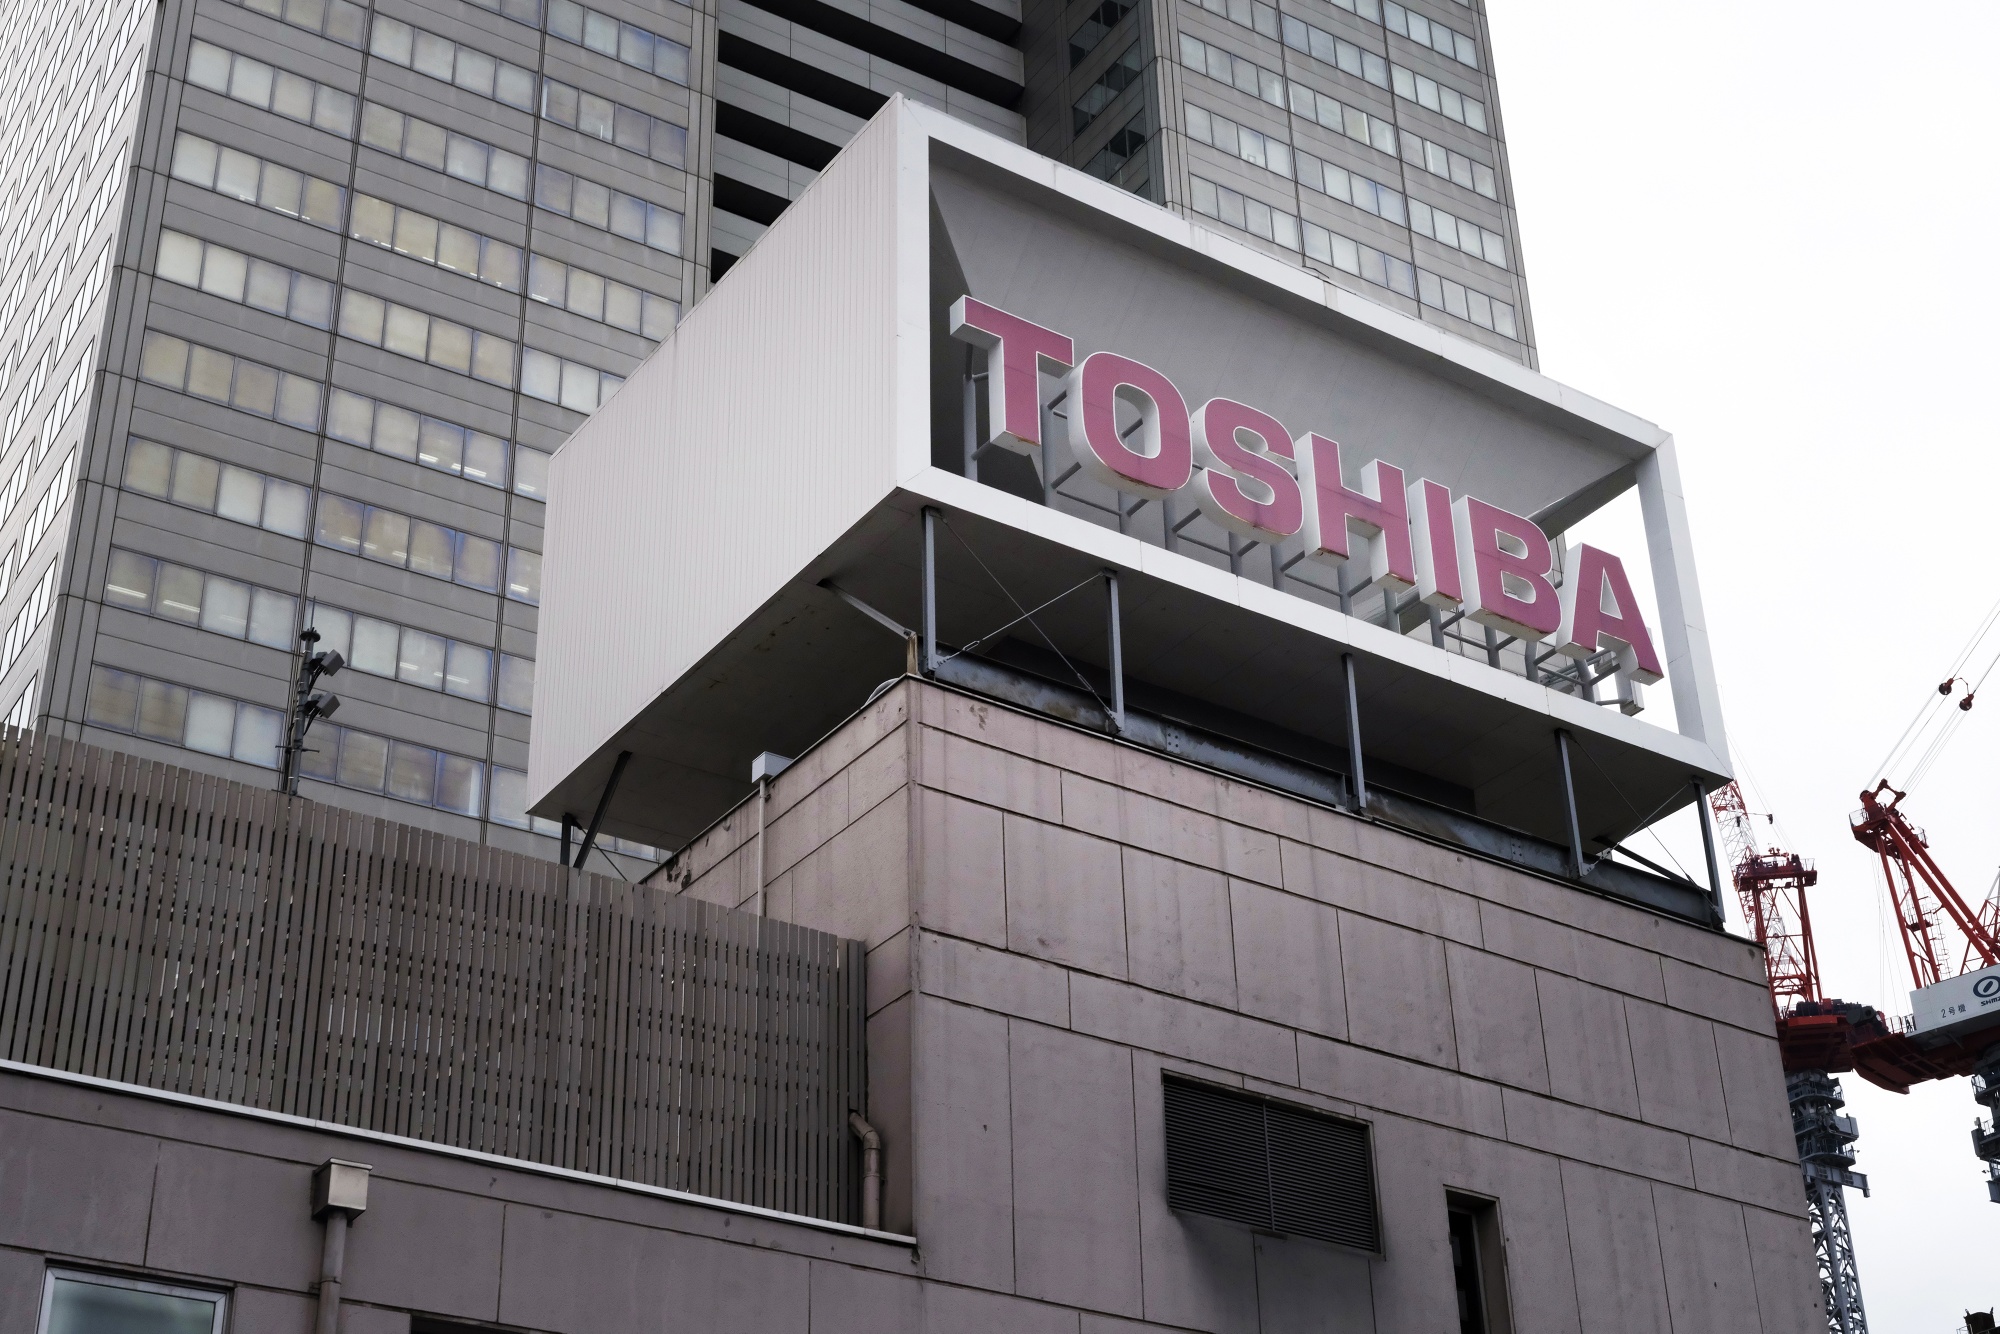 Compare prices for Toshiba across all European  stores